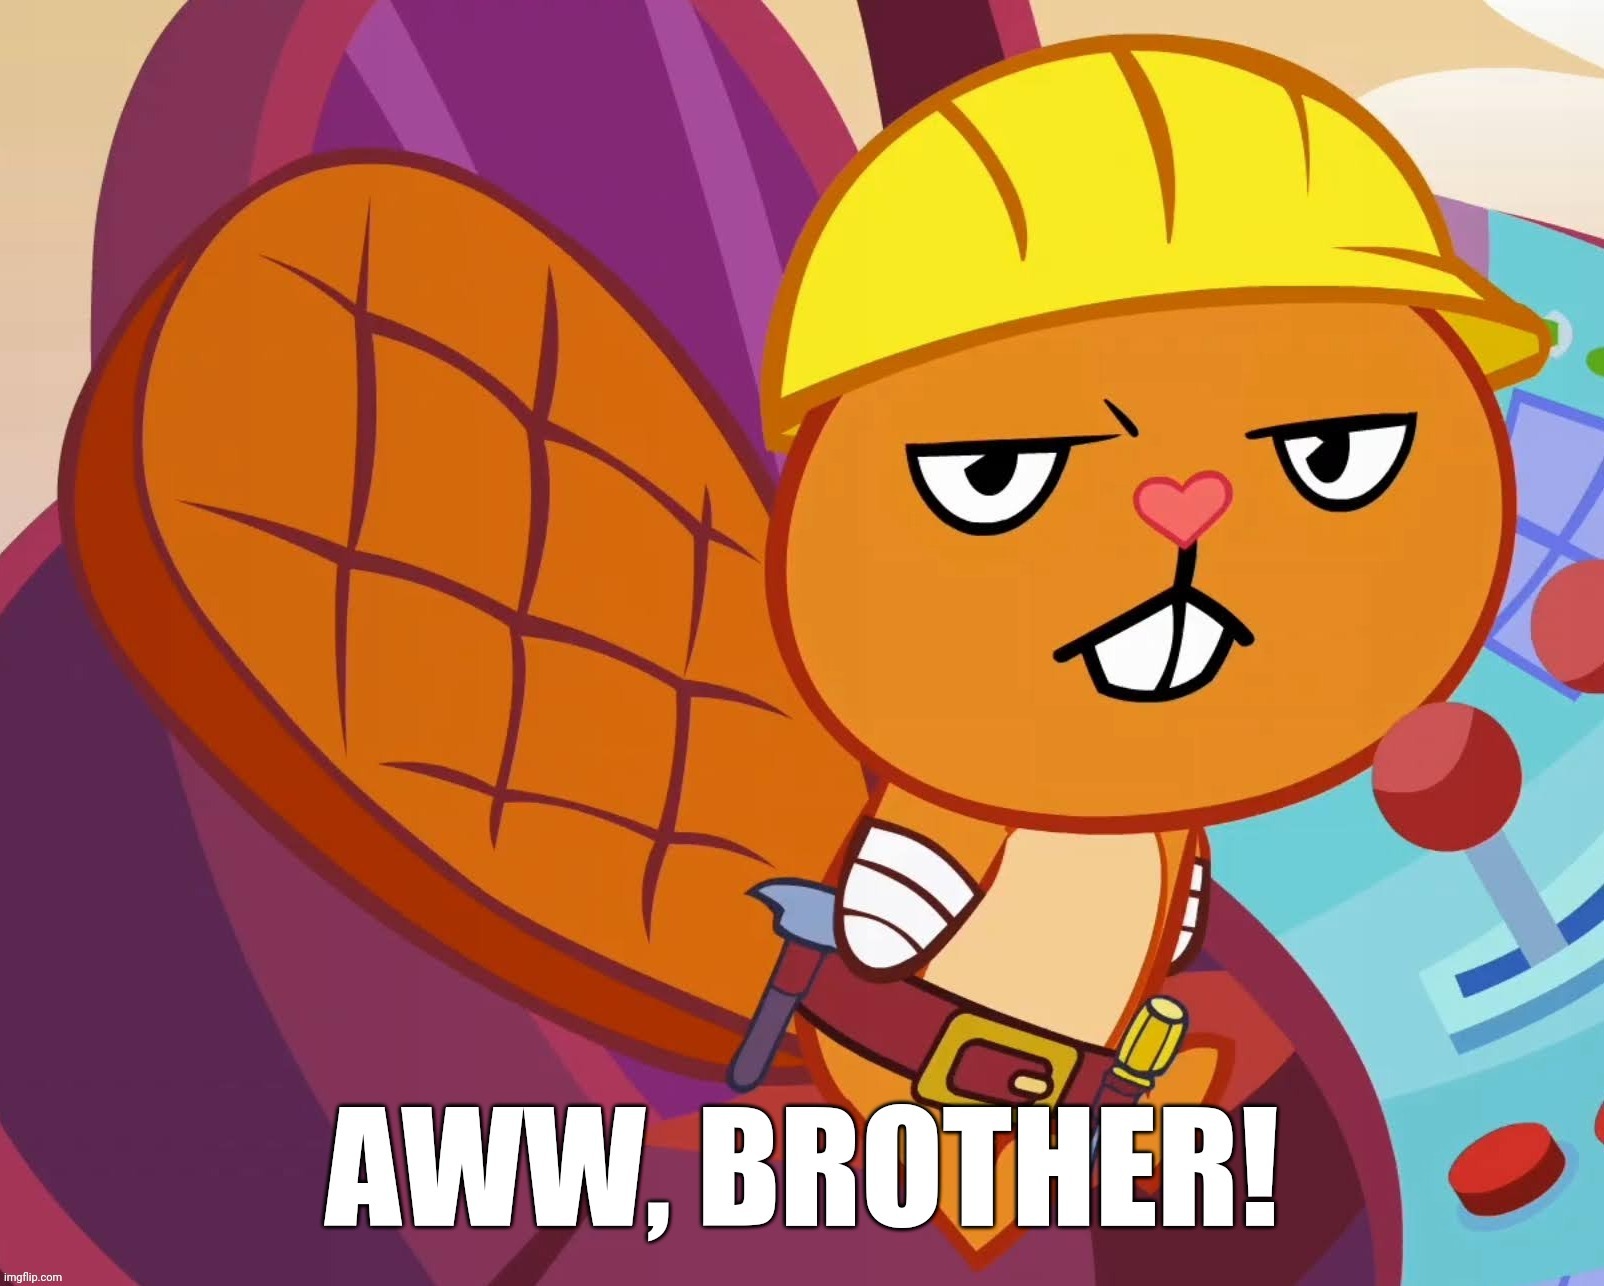 Handy "Aww, Brother" (HTF) | image tagged in handy aww brother htf | made w/ Imgflip meme maker